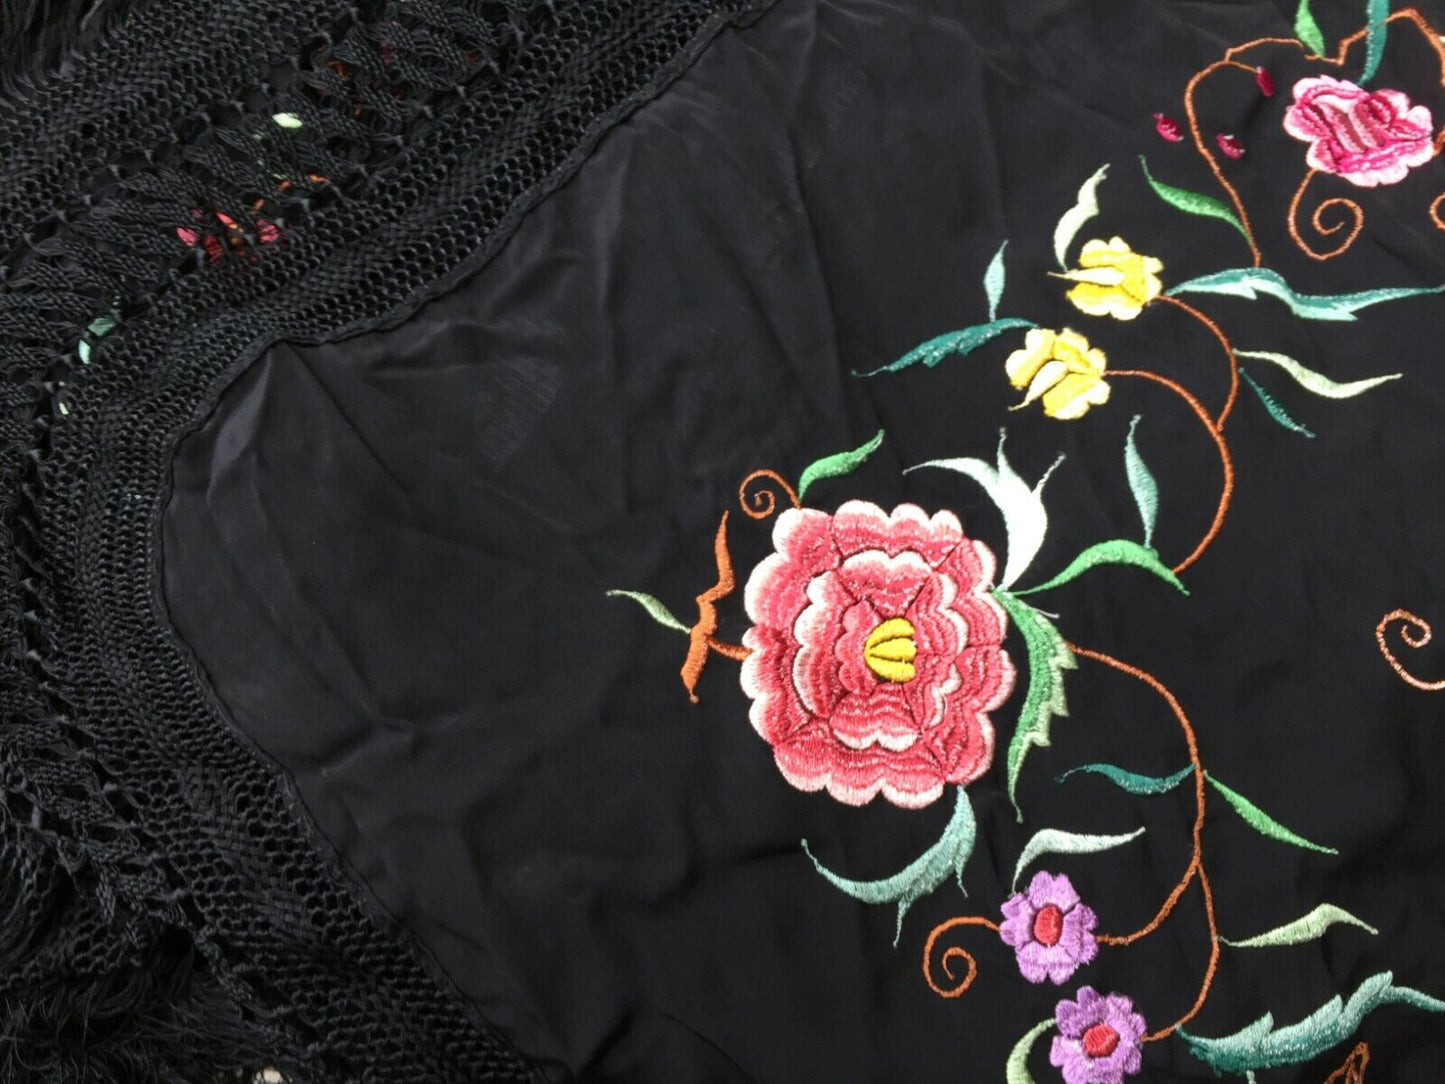 Close-up of the detailed floral patterns woven into the silk fabric